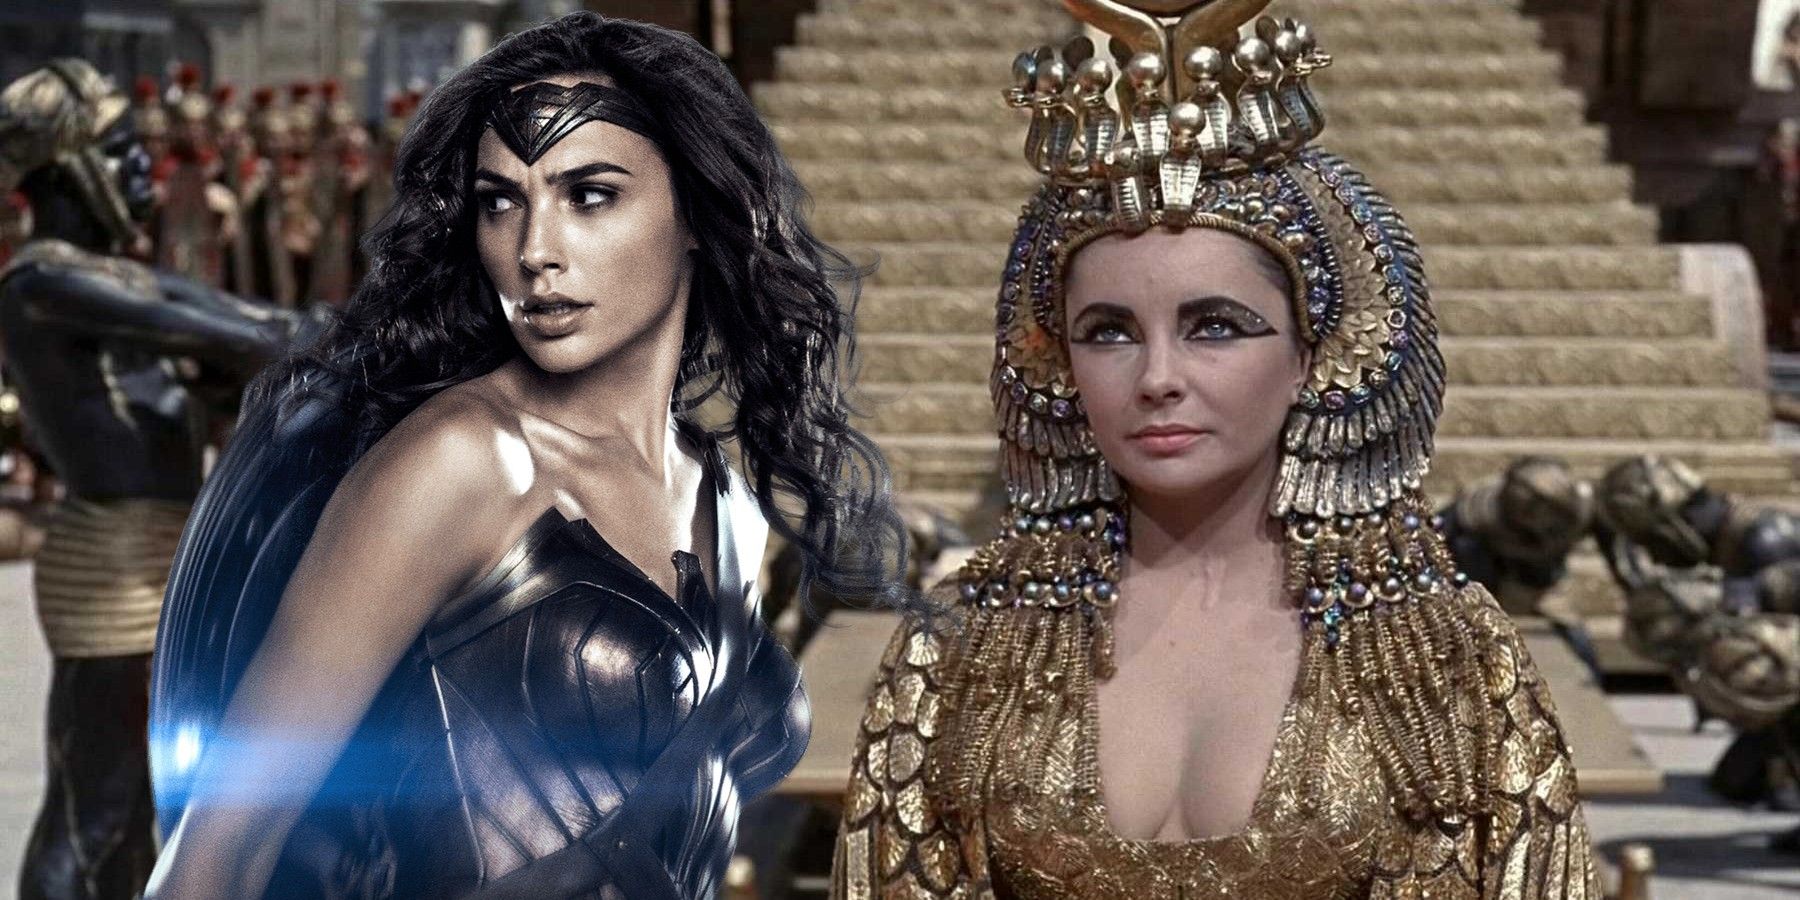 Split image of Cleopatra and Gal Gadot